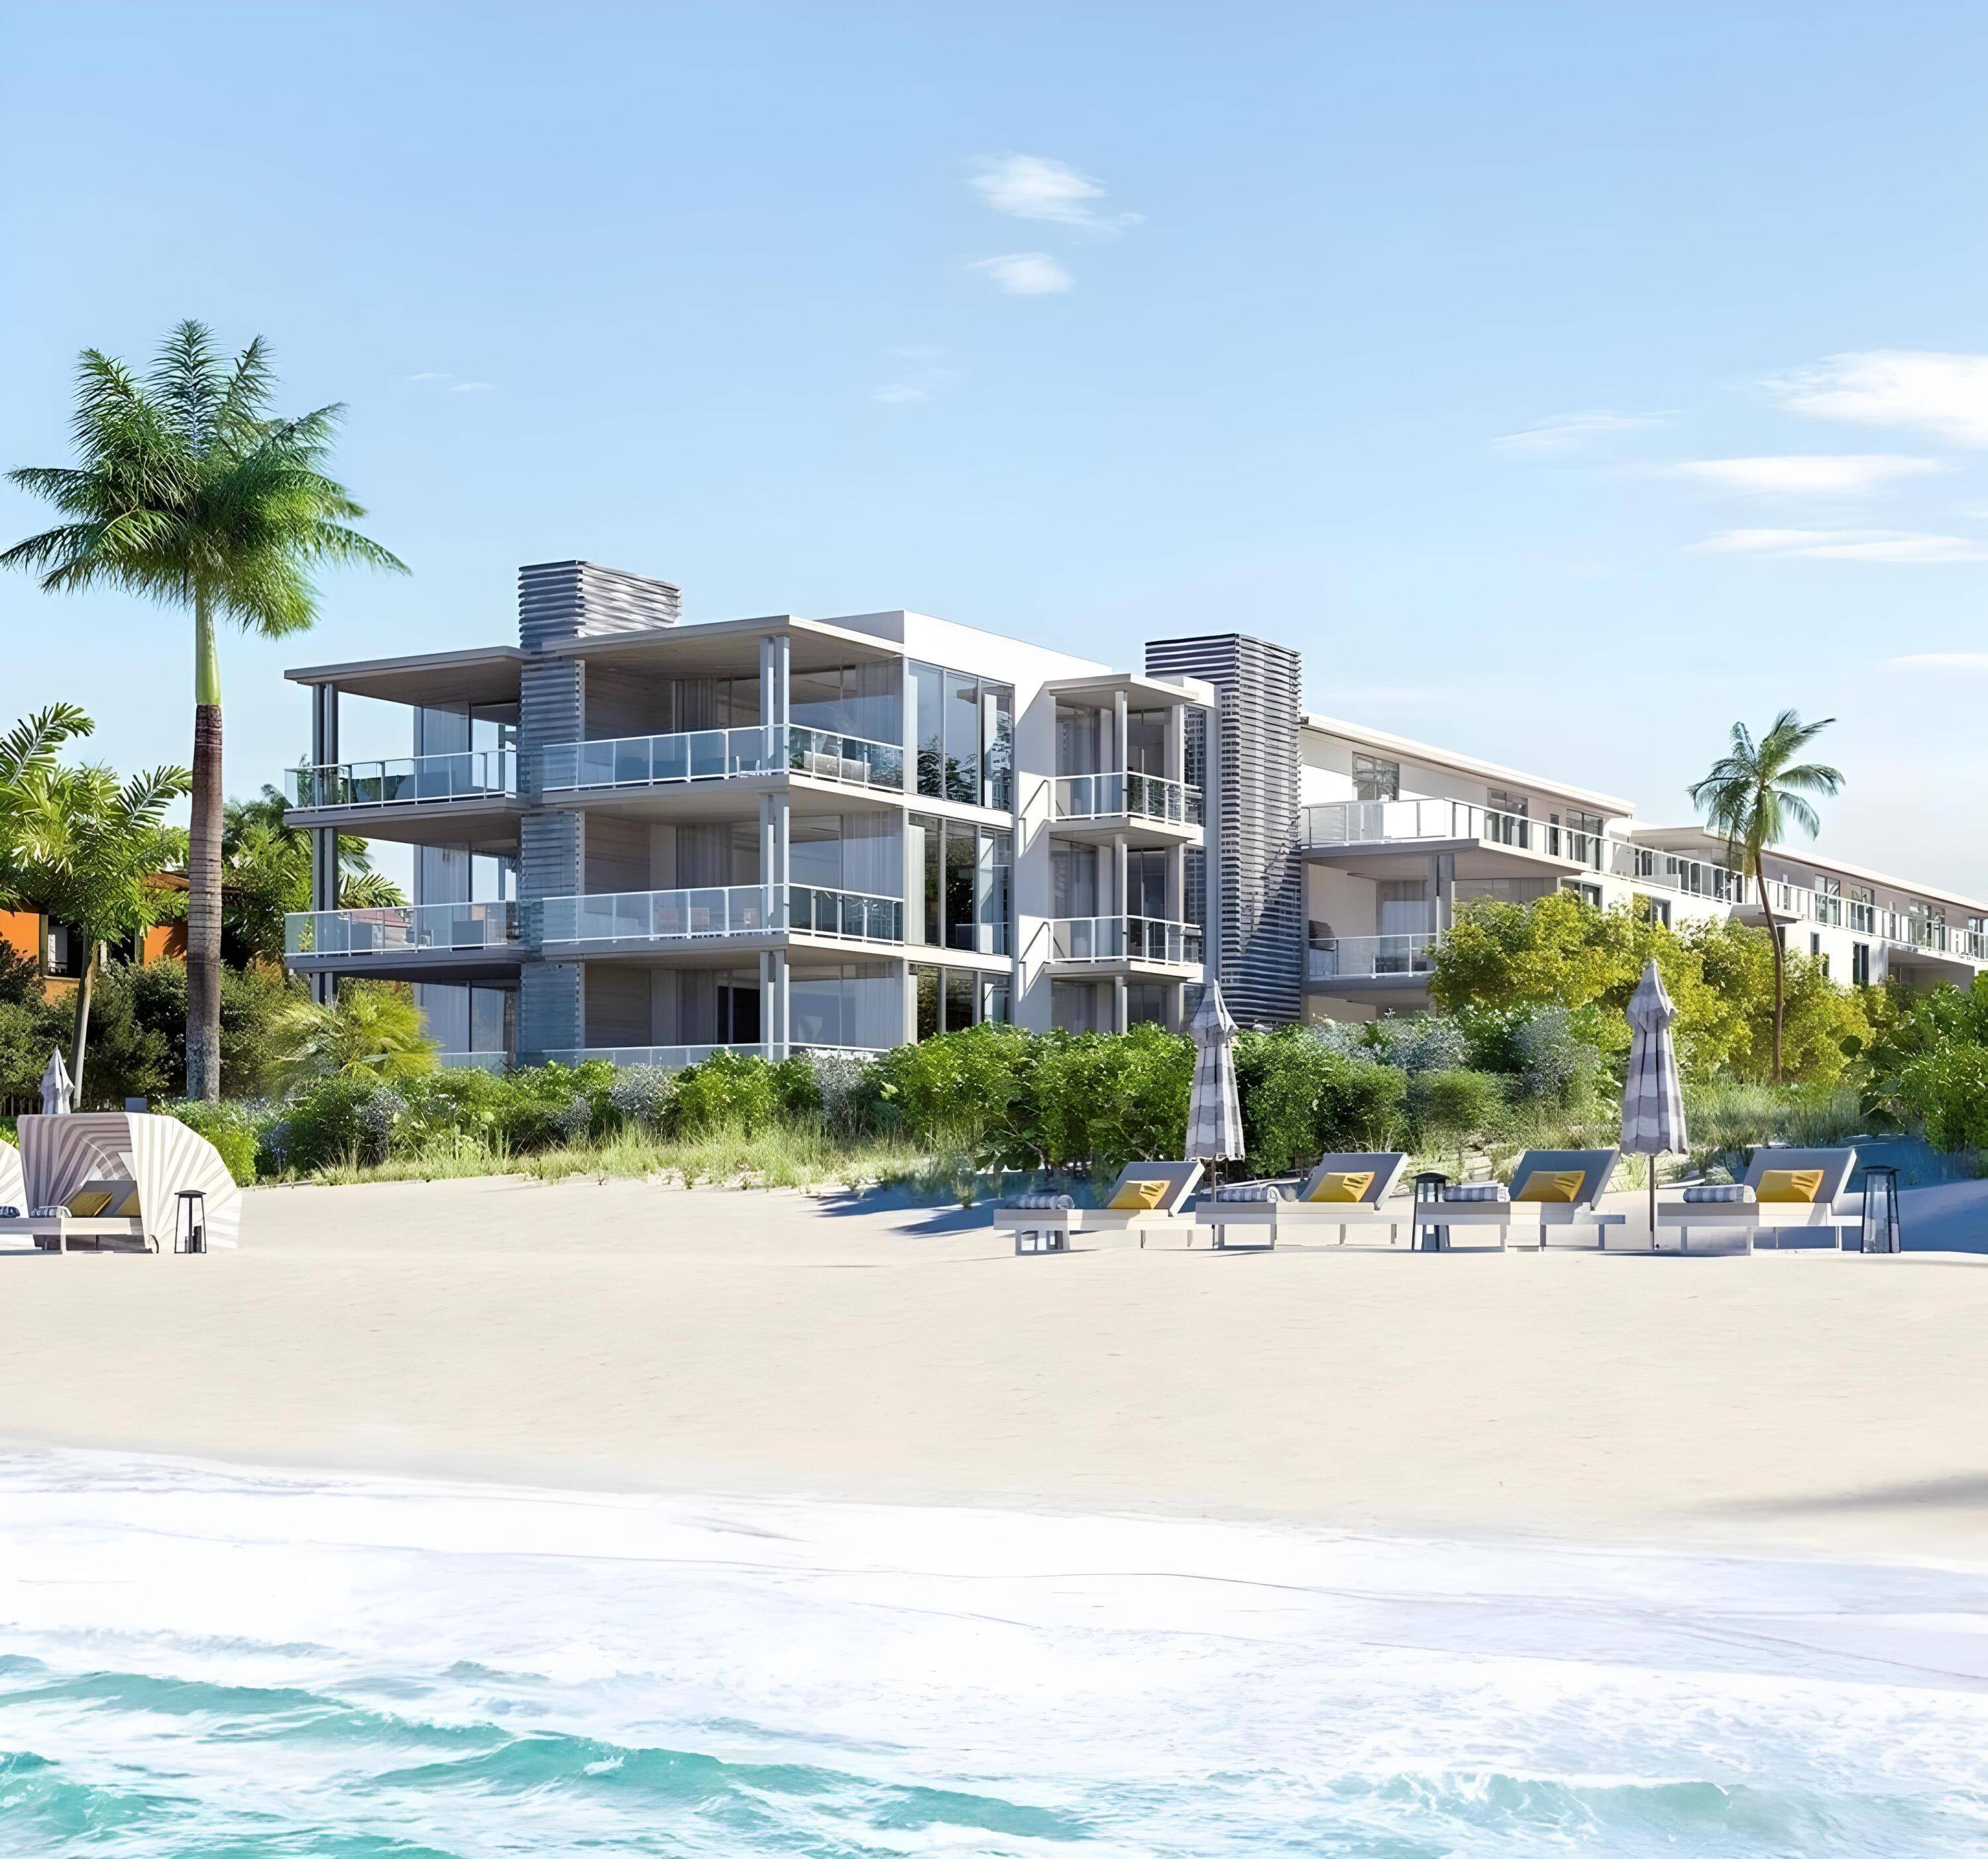 Bring all Offers ! Luxury New Modern Oceanfront Oasis.